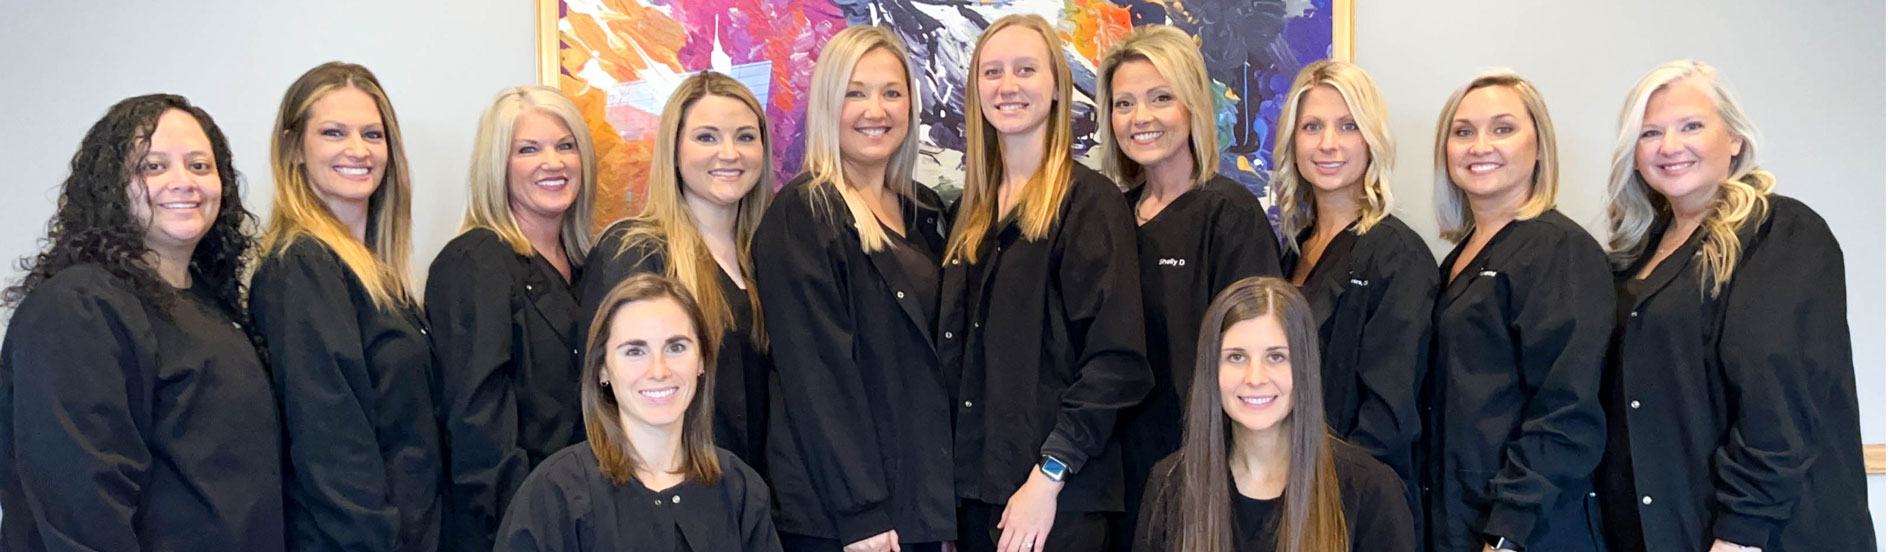 Dentists in Columbia, MO, with their dental team sharing smiles for a photo.